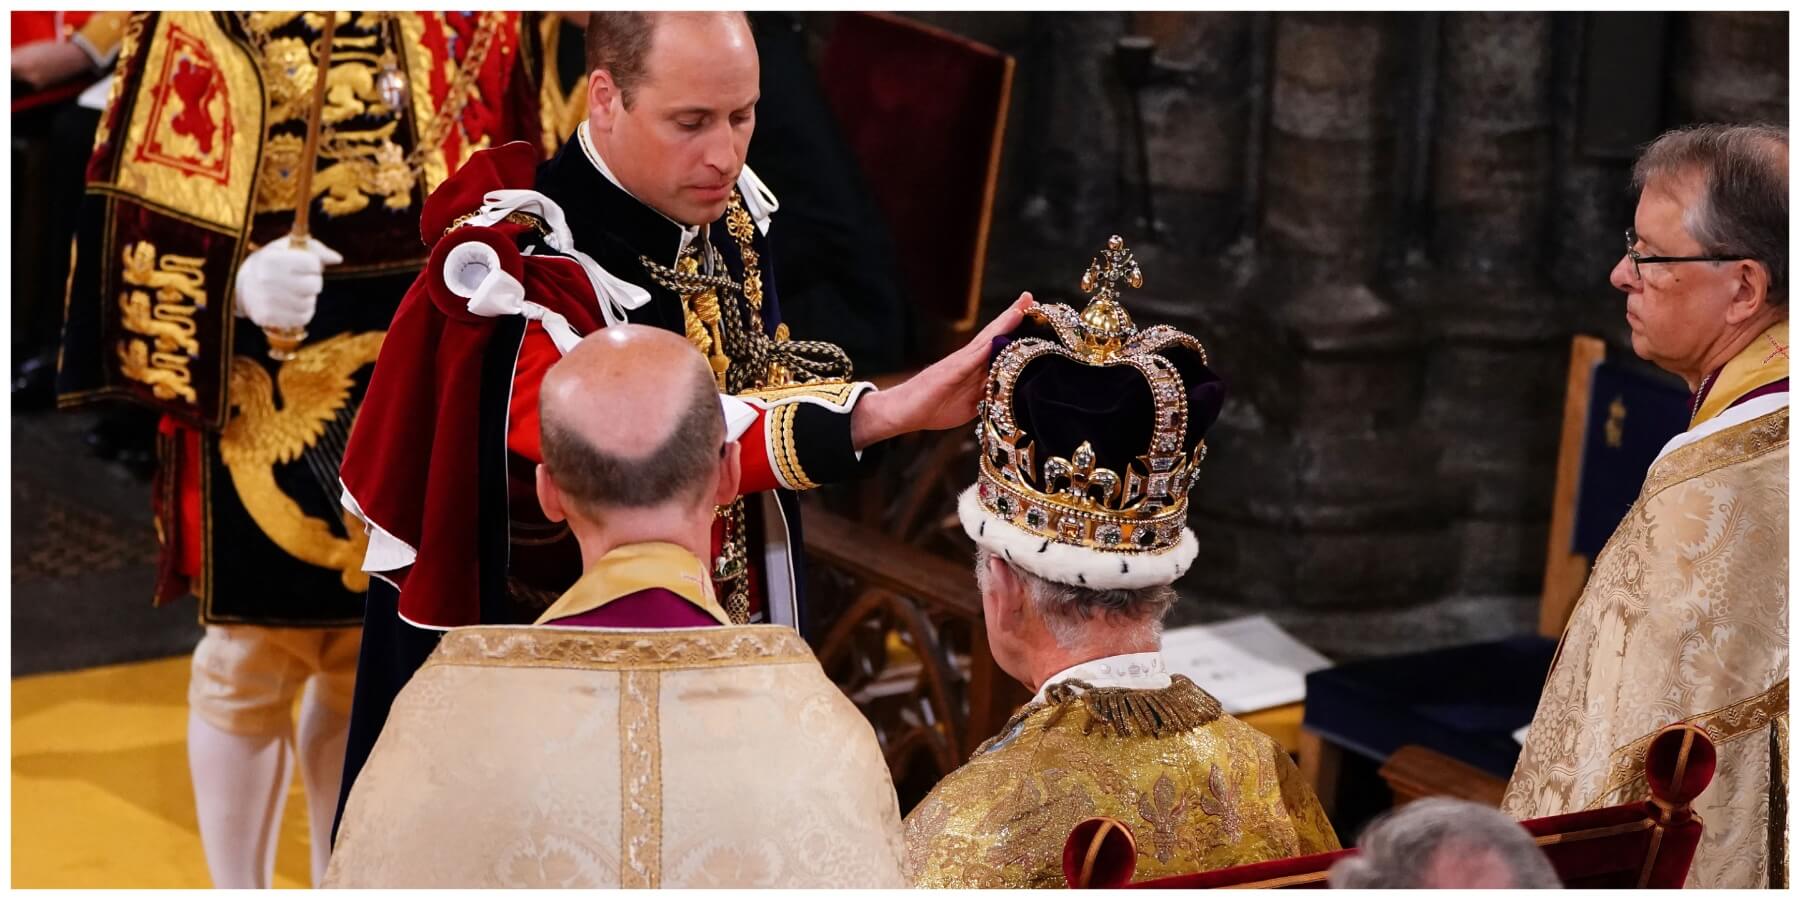 Prince William touched King Charles' crown during his father's coronation in May 2023.